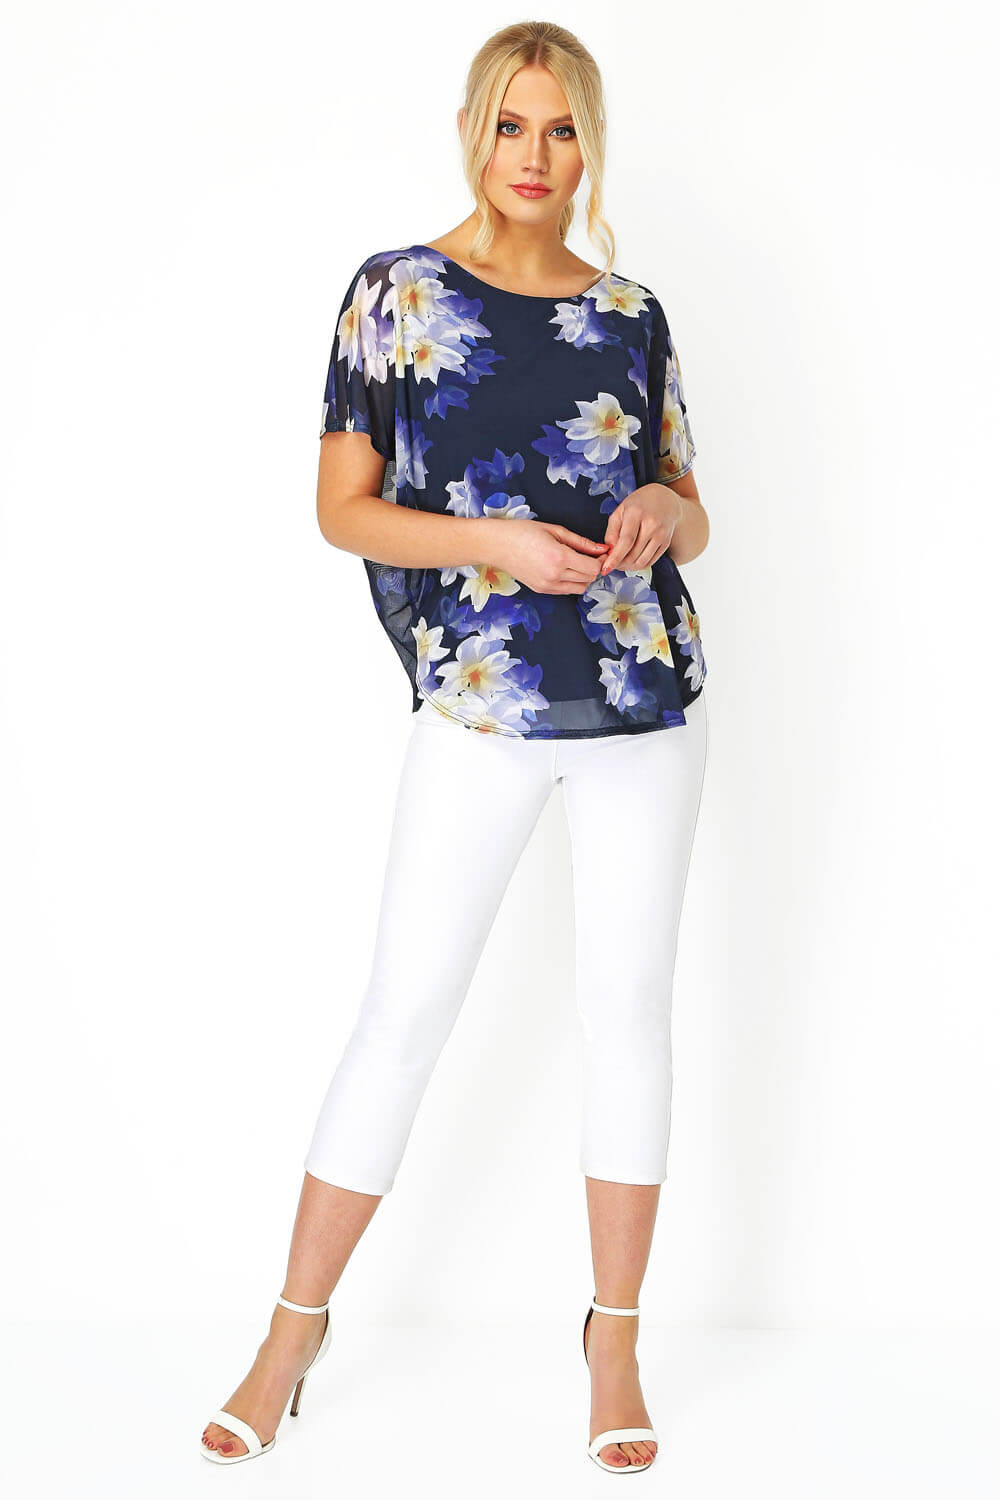 Blue Floral Chiffon Overlay Top, Image 2 of 8